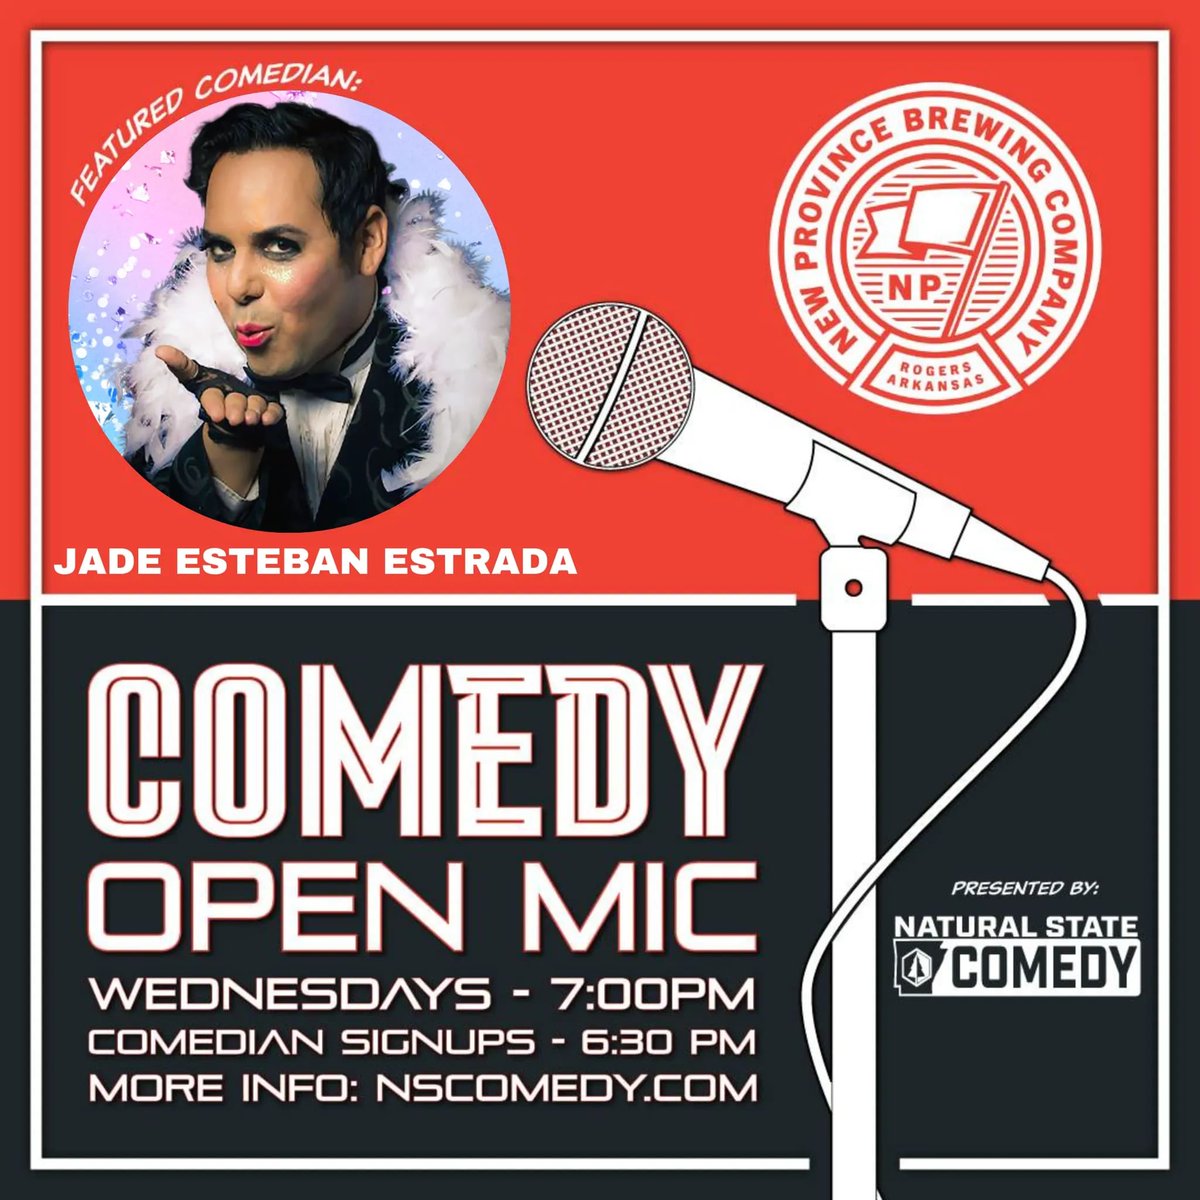 Hump Day is upon us, y'all! Tonight, I'll be your featured comedian at Open Mic Comedy at New Province Brewing Company in Rogers, Arkansas! This is the first of two shows I have this week with Natural State Comedy! Totally thrilled! ✨
#rogersarkansas #jadeinamerica